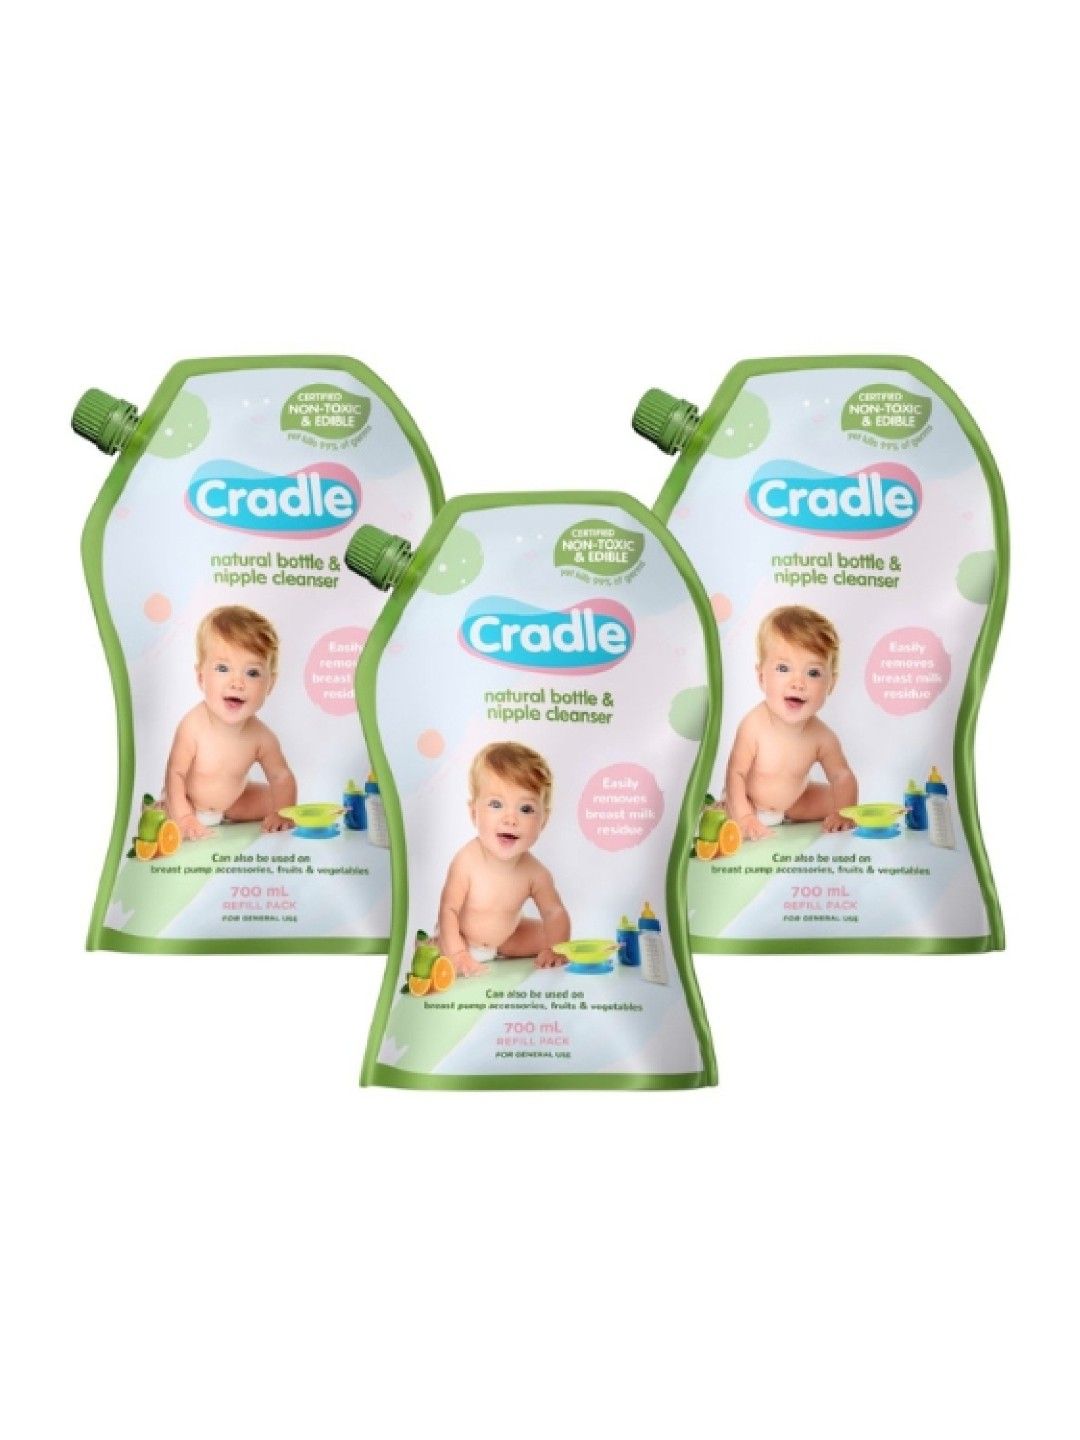 Cradle Baby Bottle and Nipple Cleanser 700ml Refill x3 (No Color- Image 1)